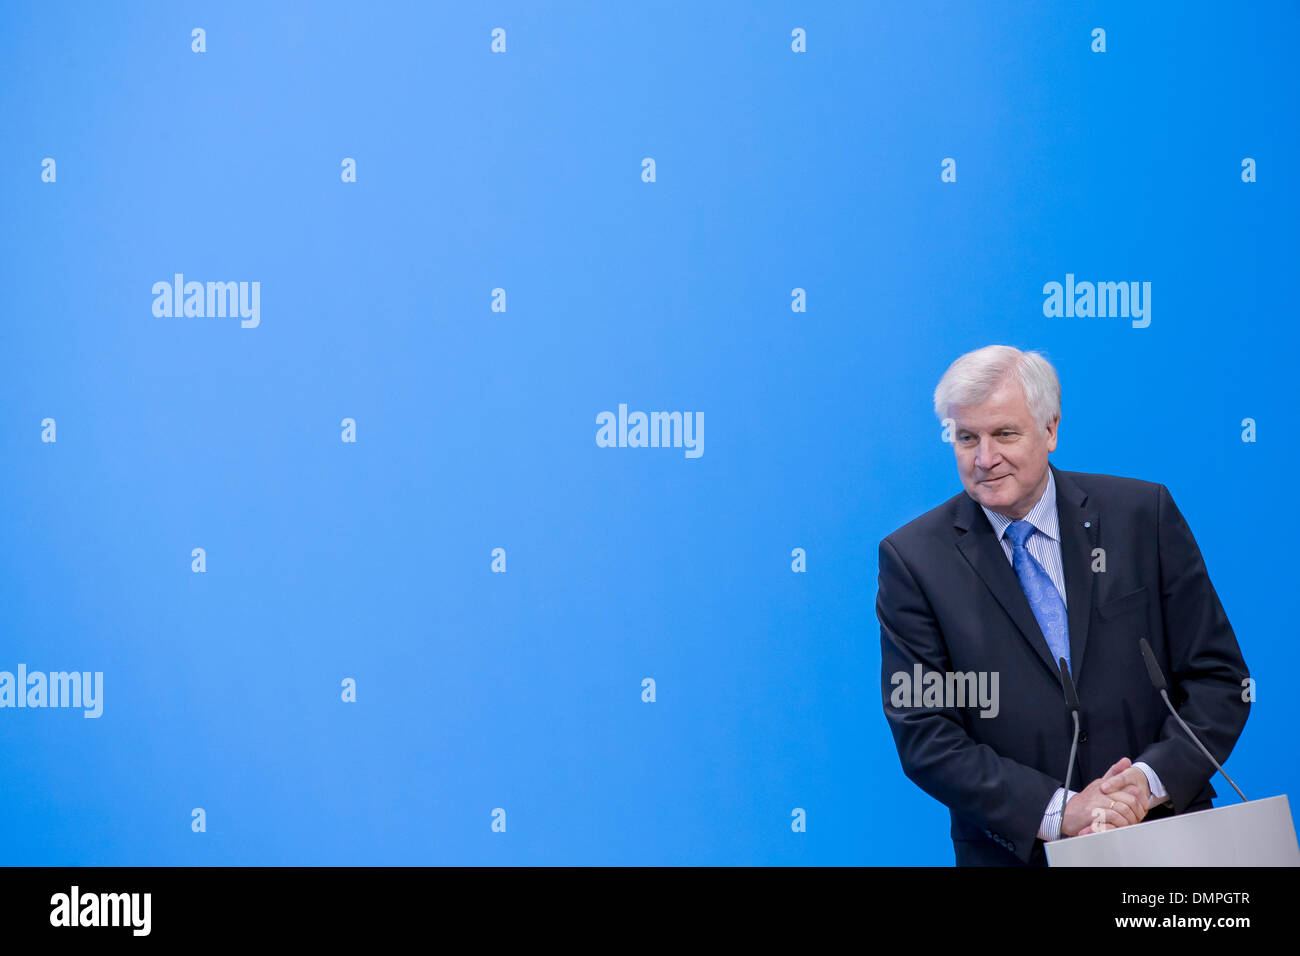 Berlin, Germany. December, 16th, 2013. Merkel, CDU Chairman, Seehofer, CSU chairman and Gabriel, SPD Chairman sign the coalition agreement at Paul Lšbe Haus in Berlin. / Picture: Horst Seehofer (CSU), CSU chairman and Minister-President of Bavaria. Stock Photo